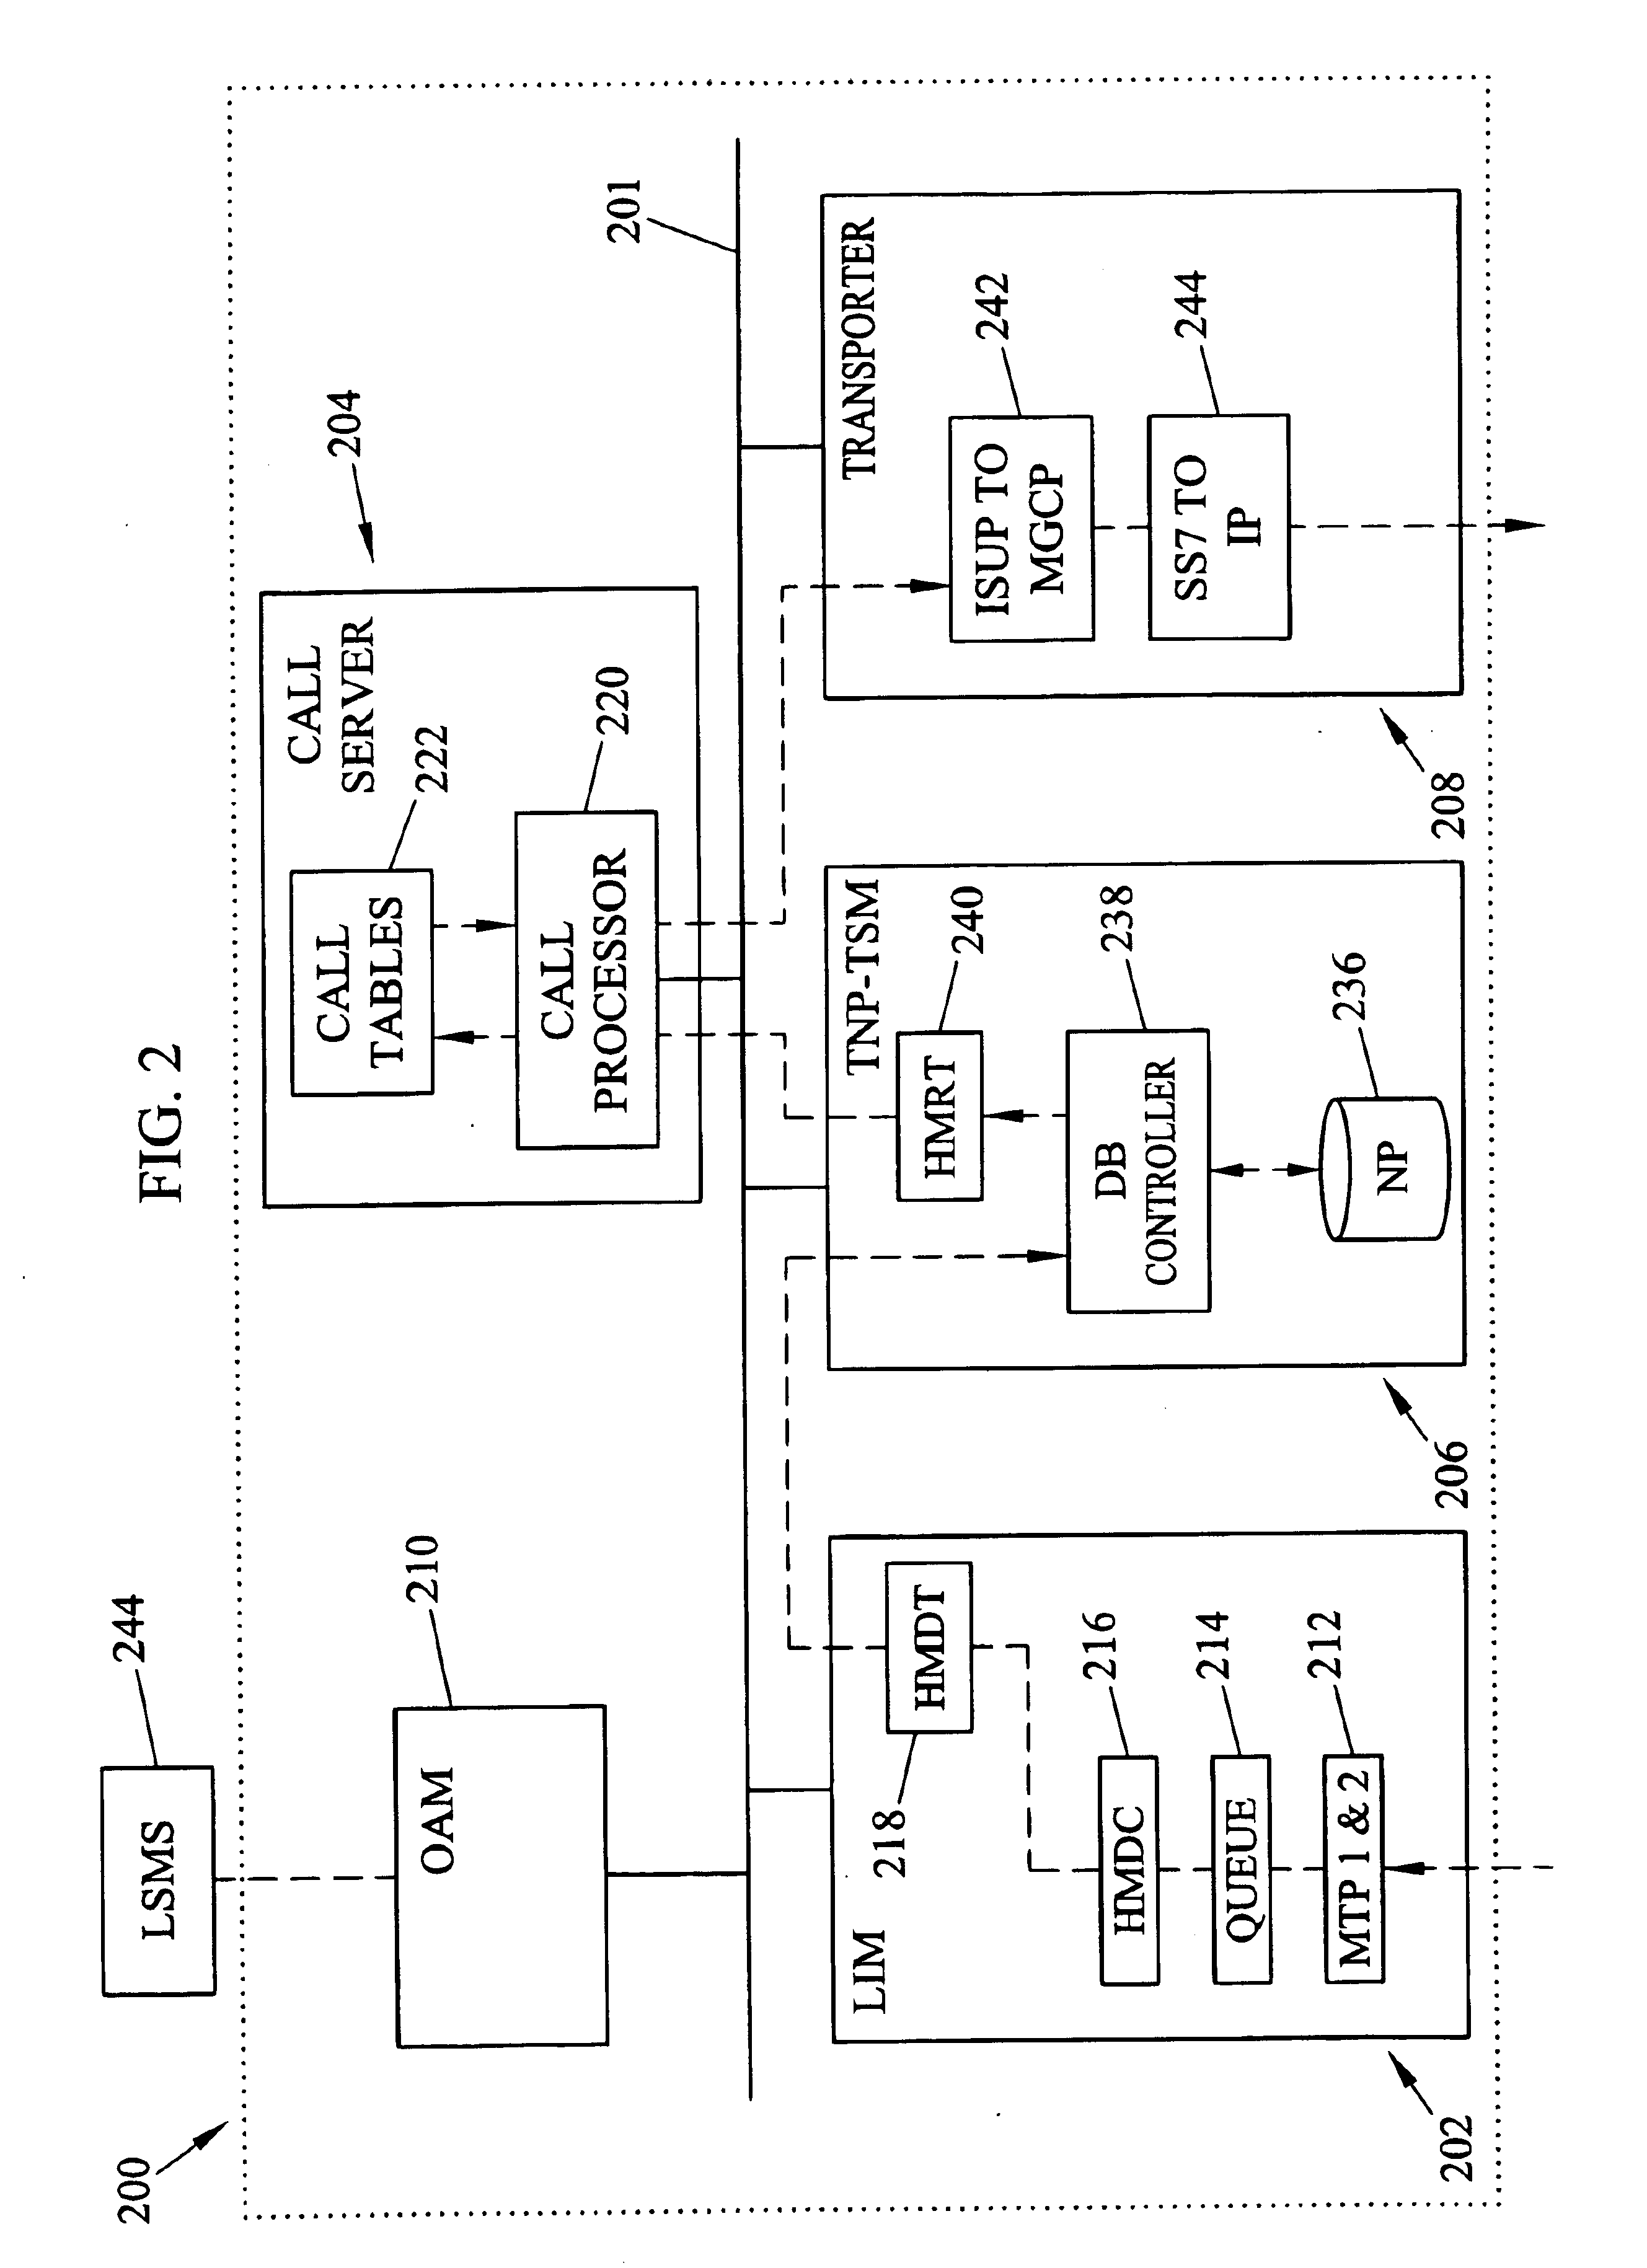 Methods and systems for improving trunk utilization for calls to ported numbers